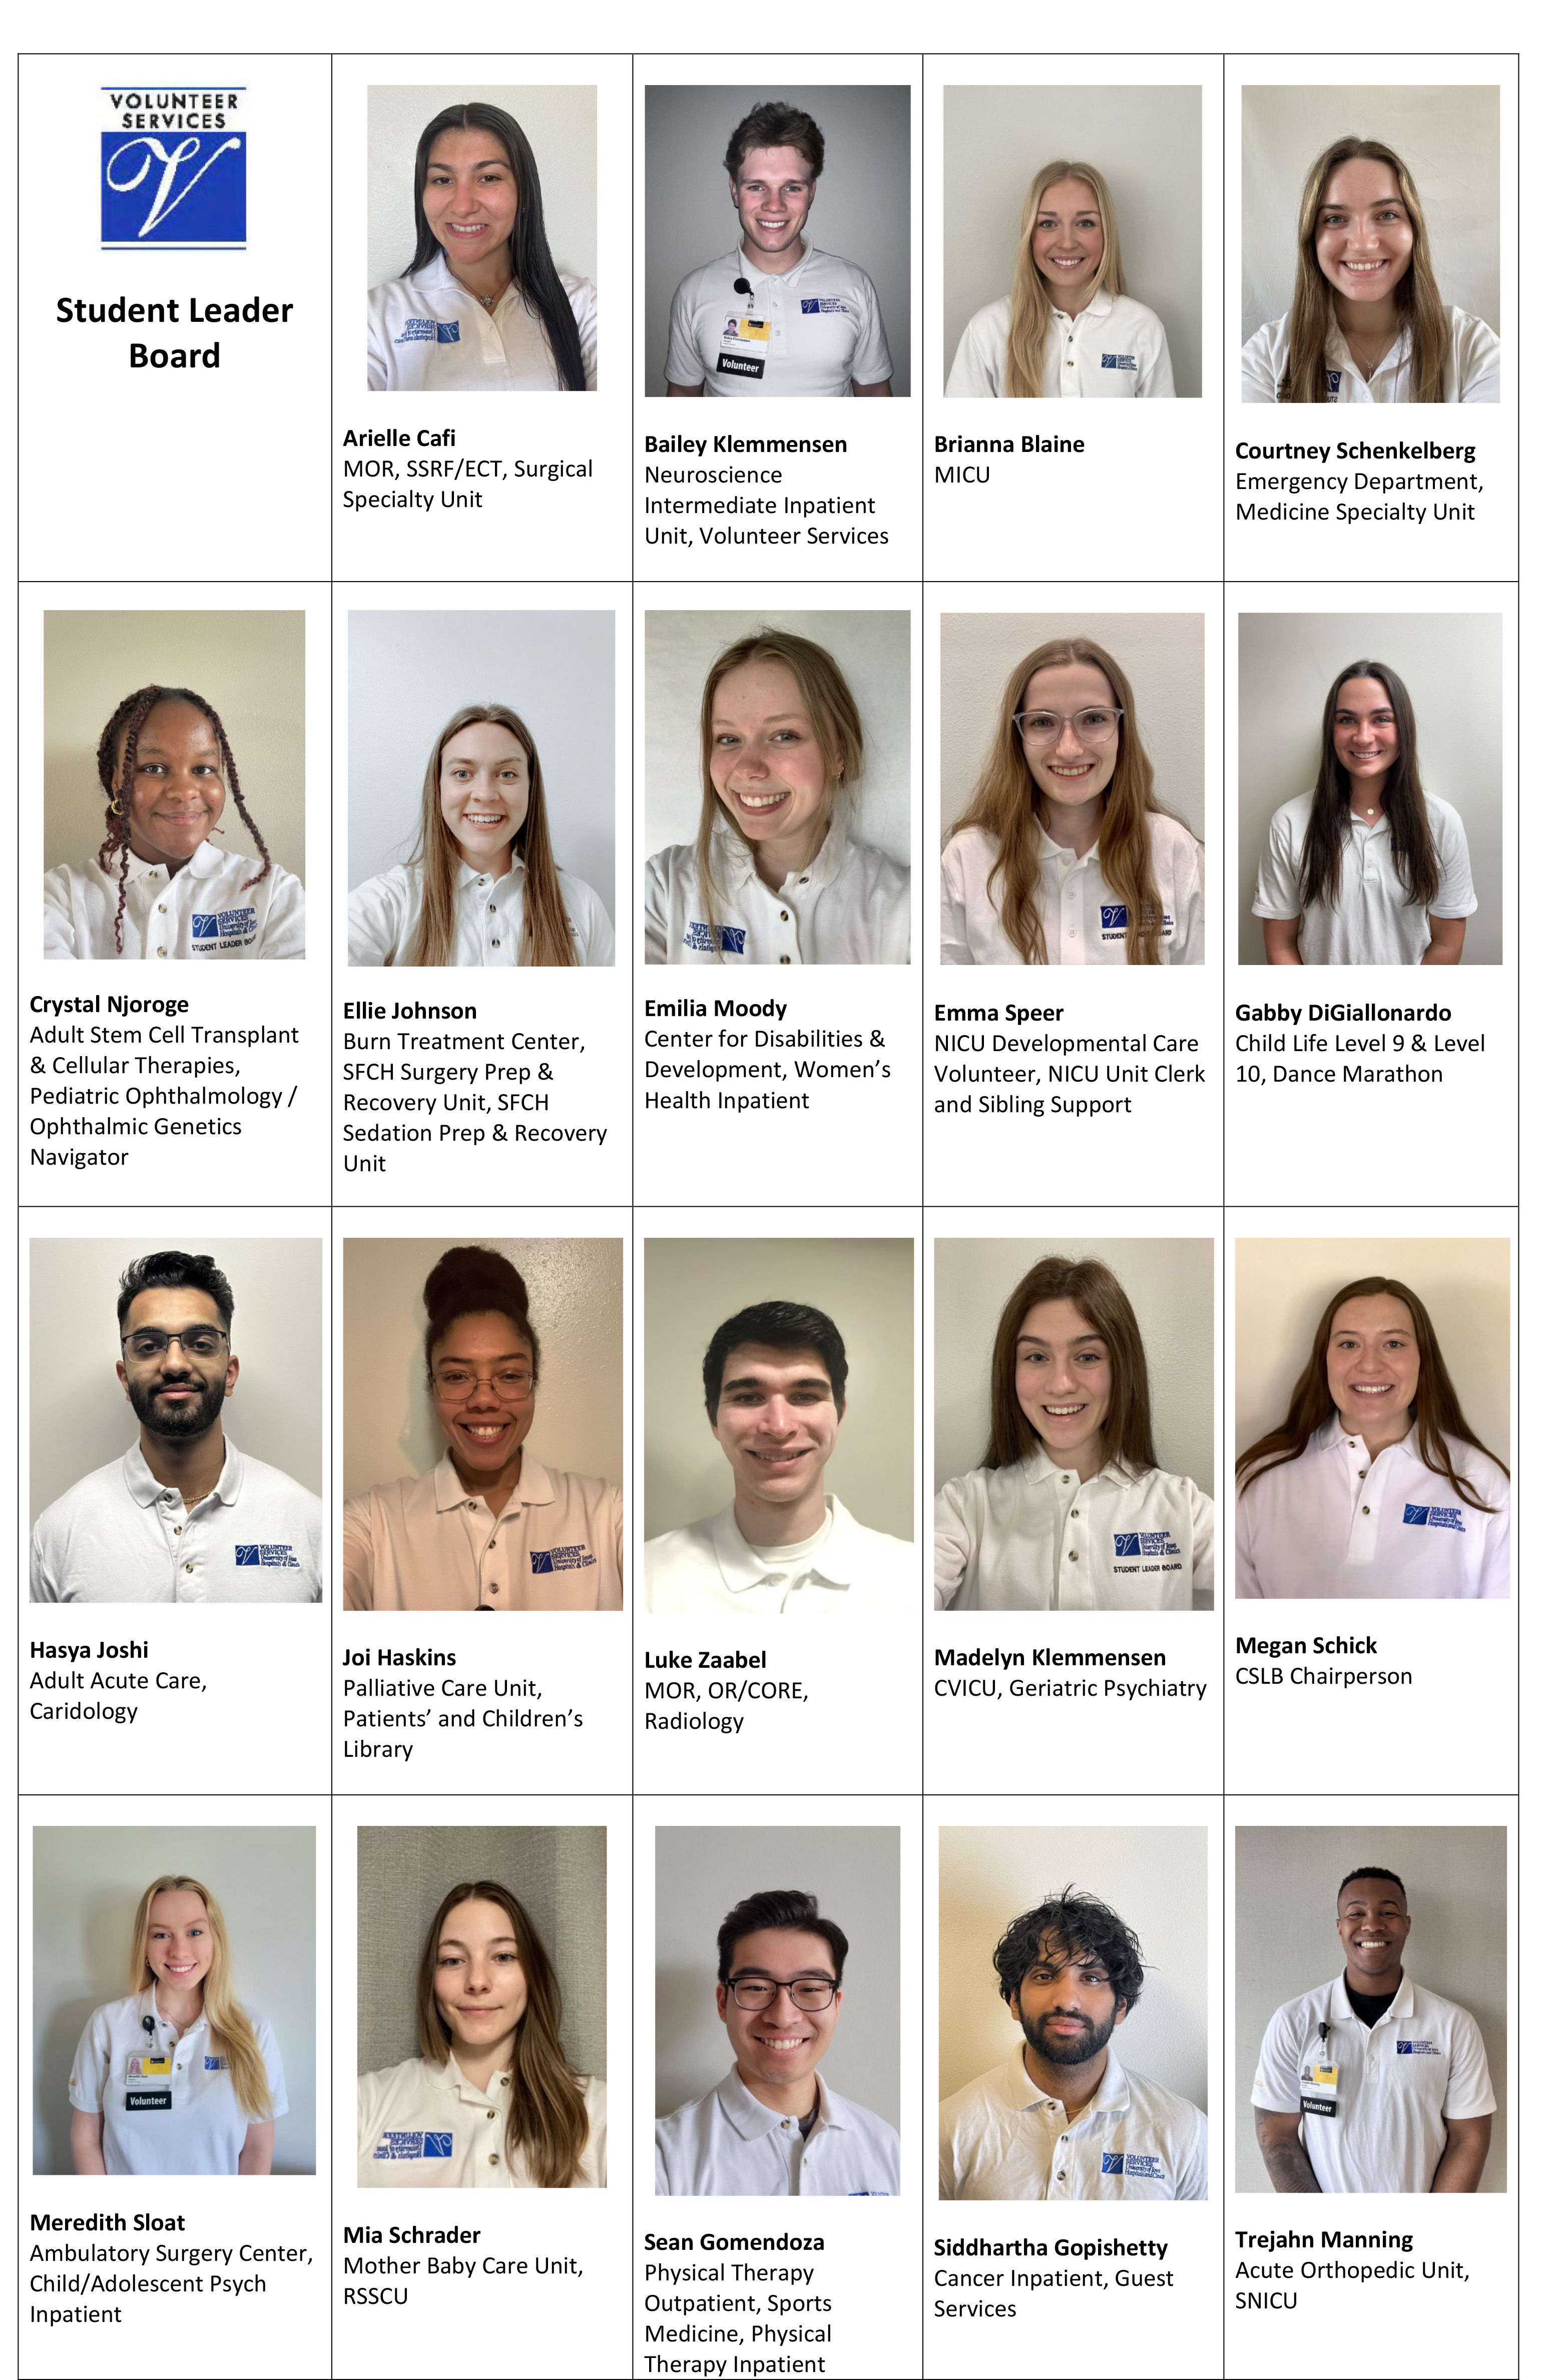 Student Leader Board-Coordinated Volunteer Placement Options